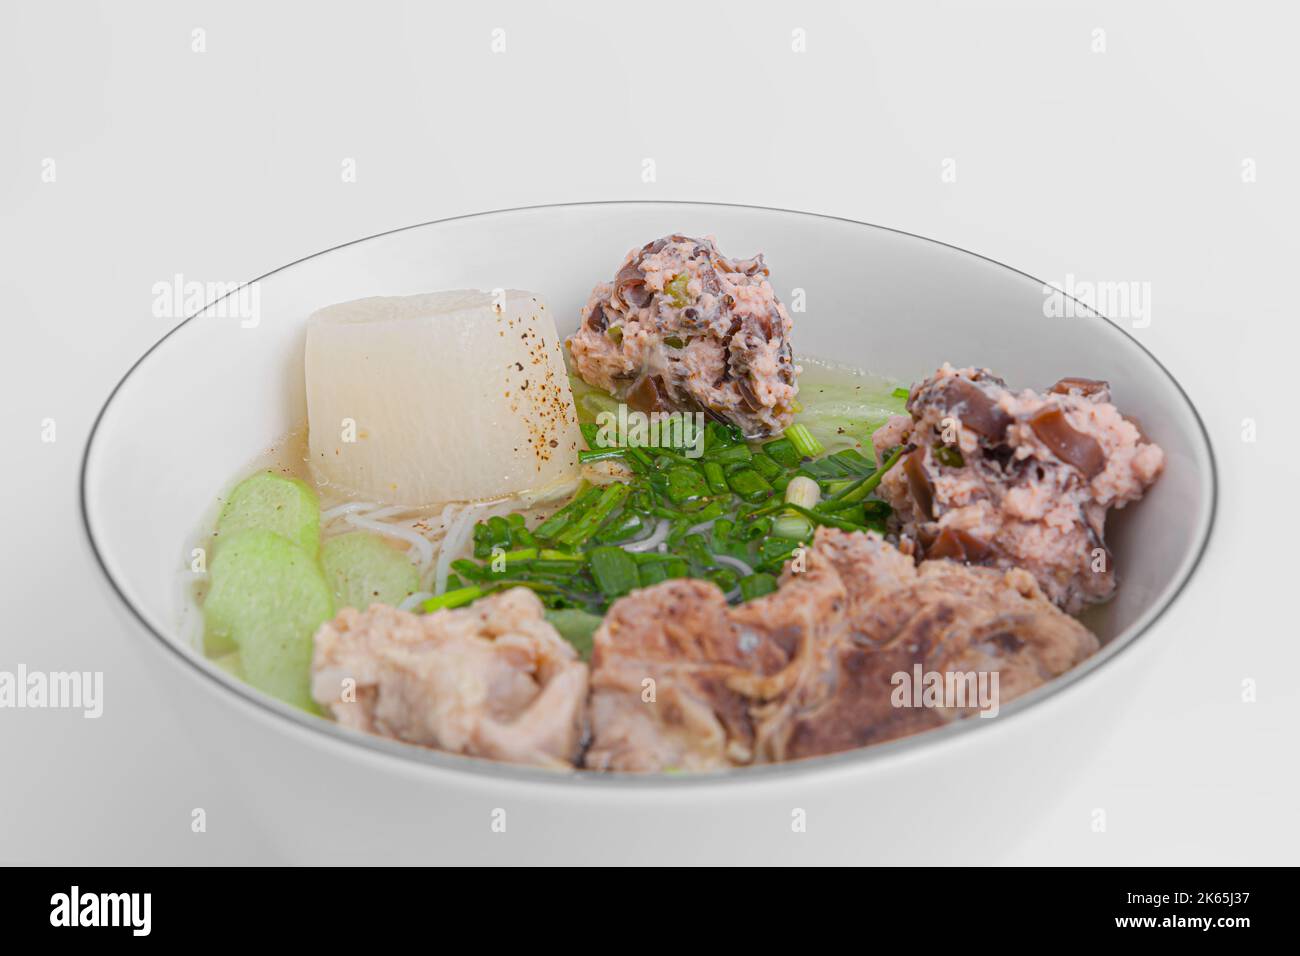 Bun Moc, Rice noodle soup with pork ball, Vietnamese food isolated on white background, close-up Stock Photo